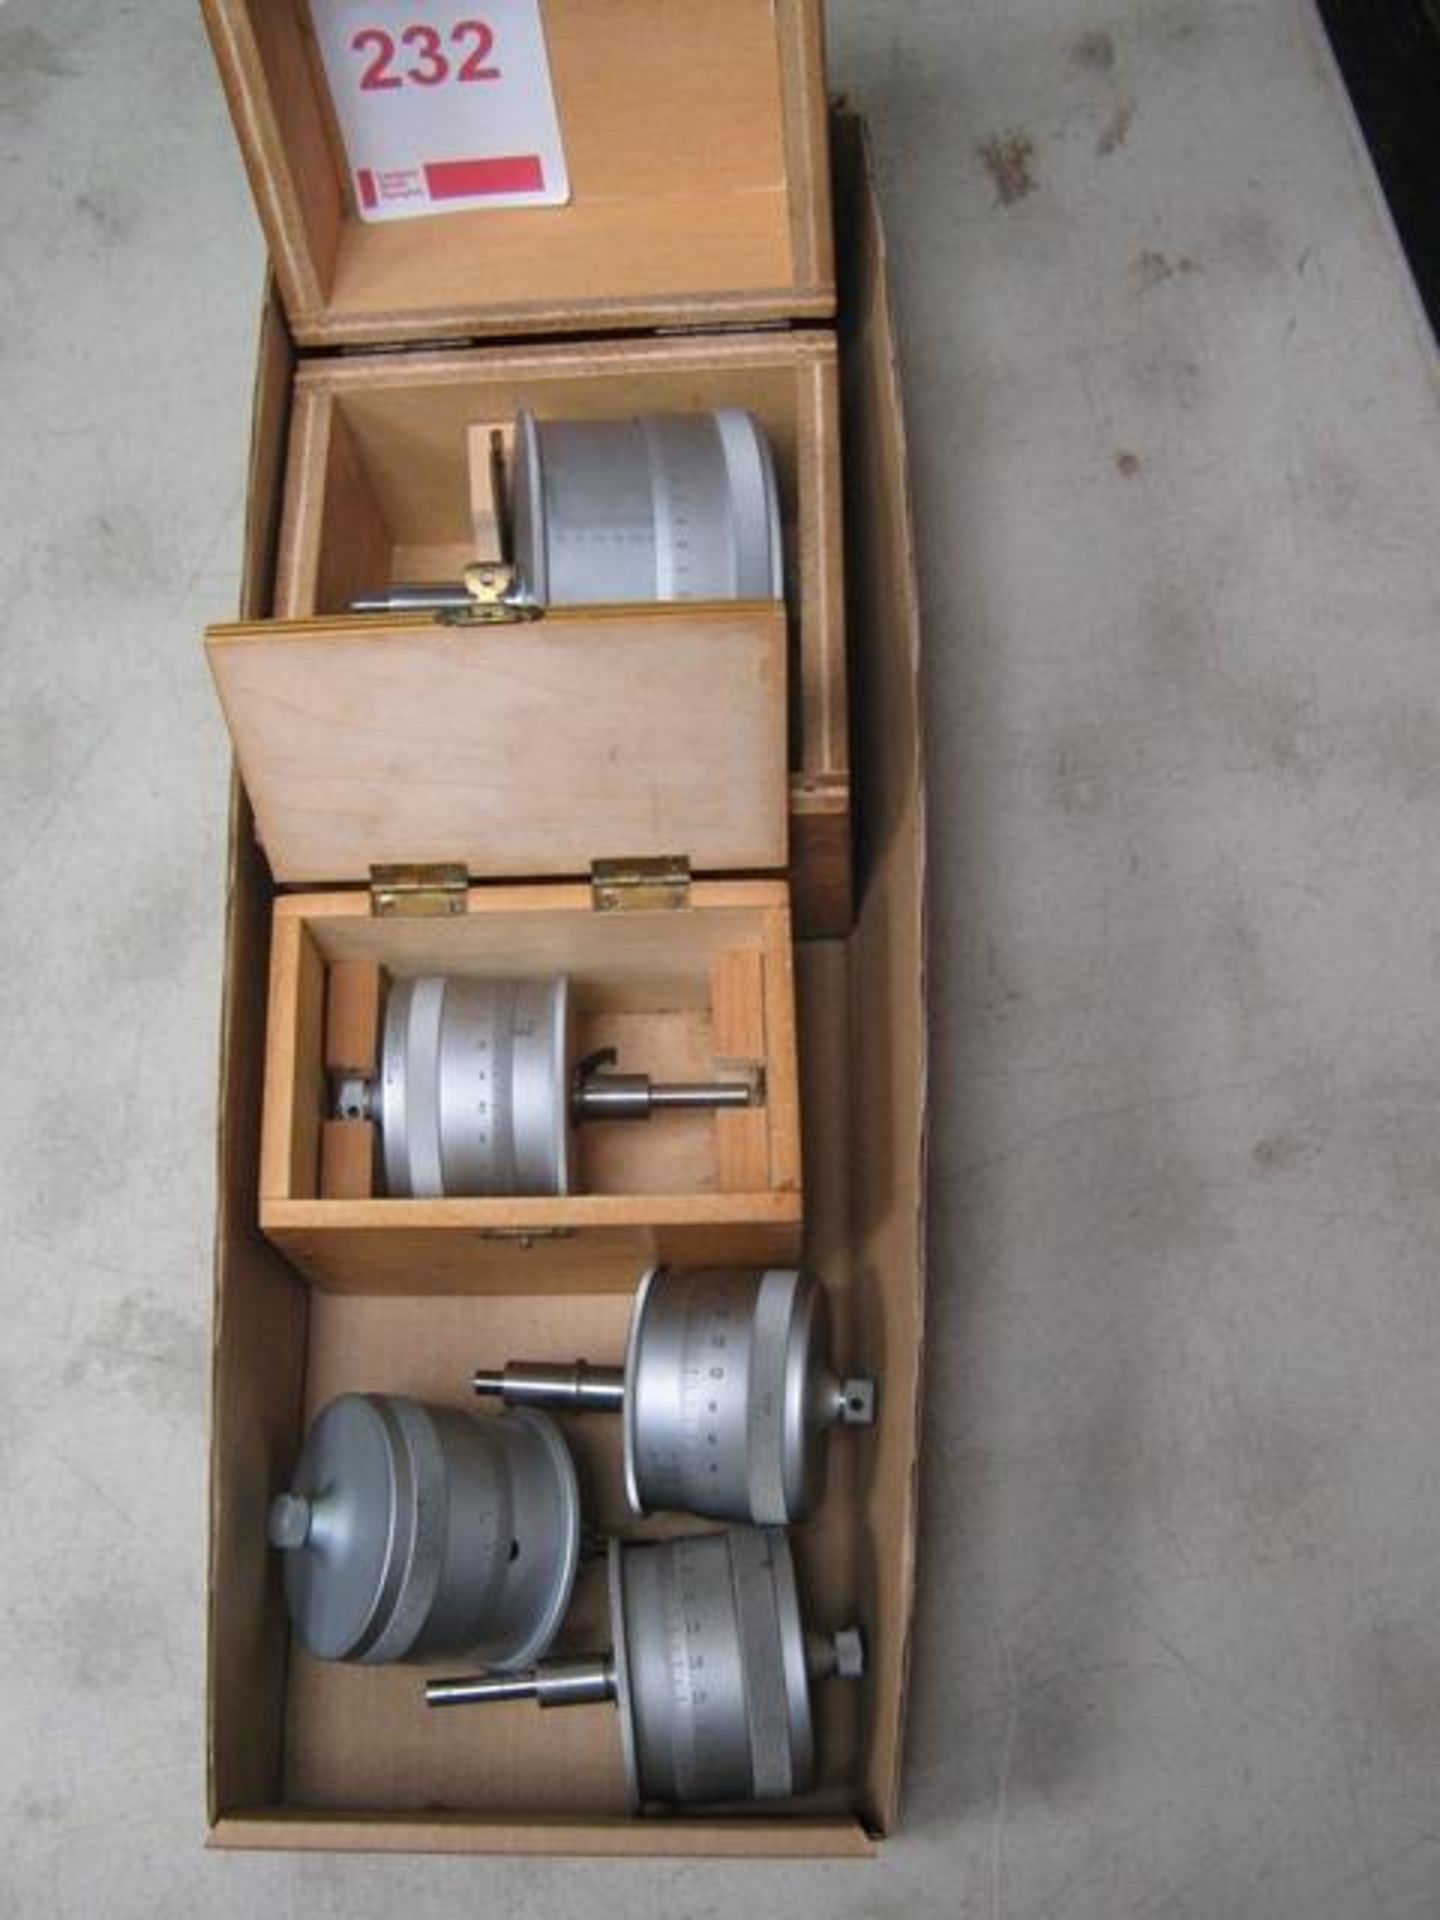 5 x large micrometer heads